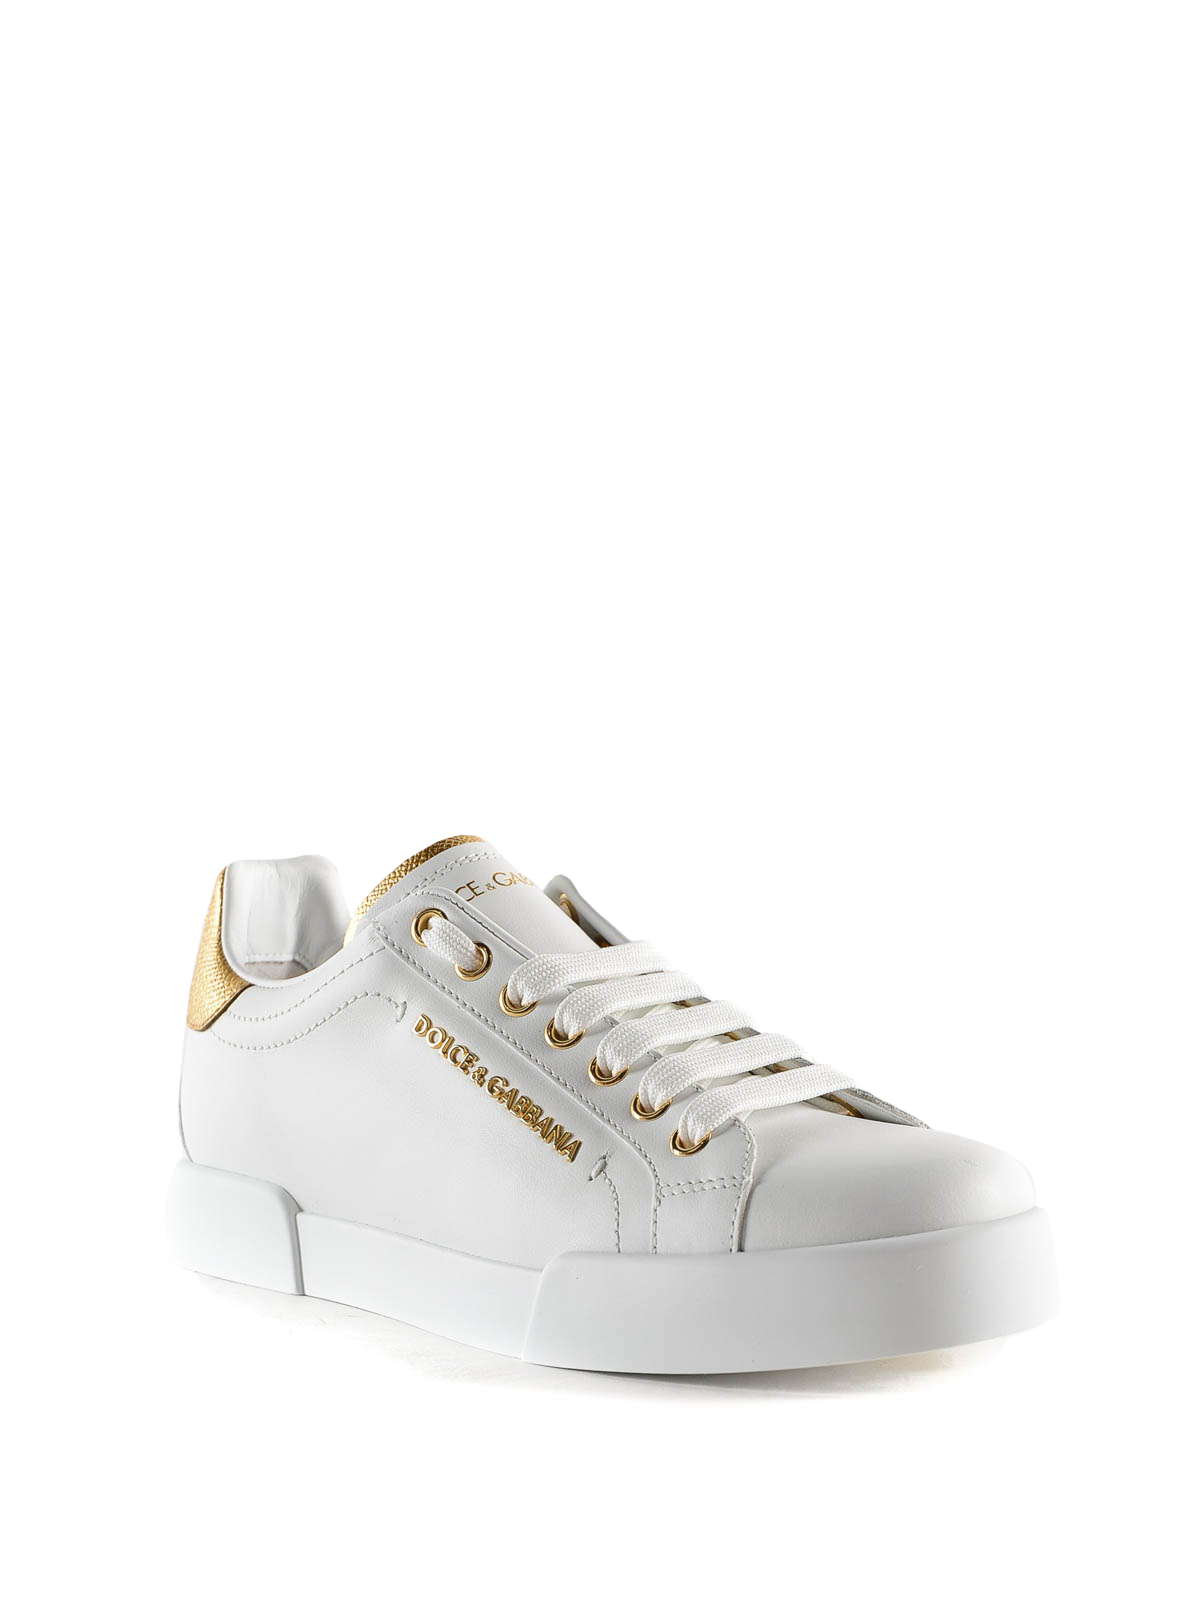 Dolce & Gabbana - Logo pearl white leather sneakers - trainers ...